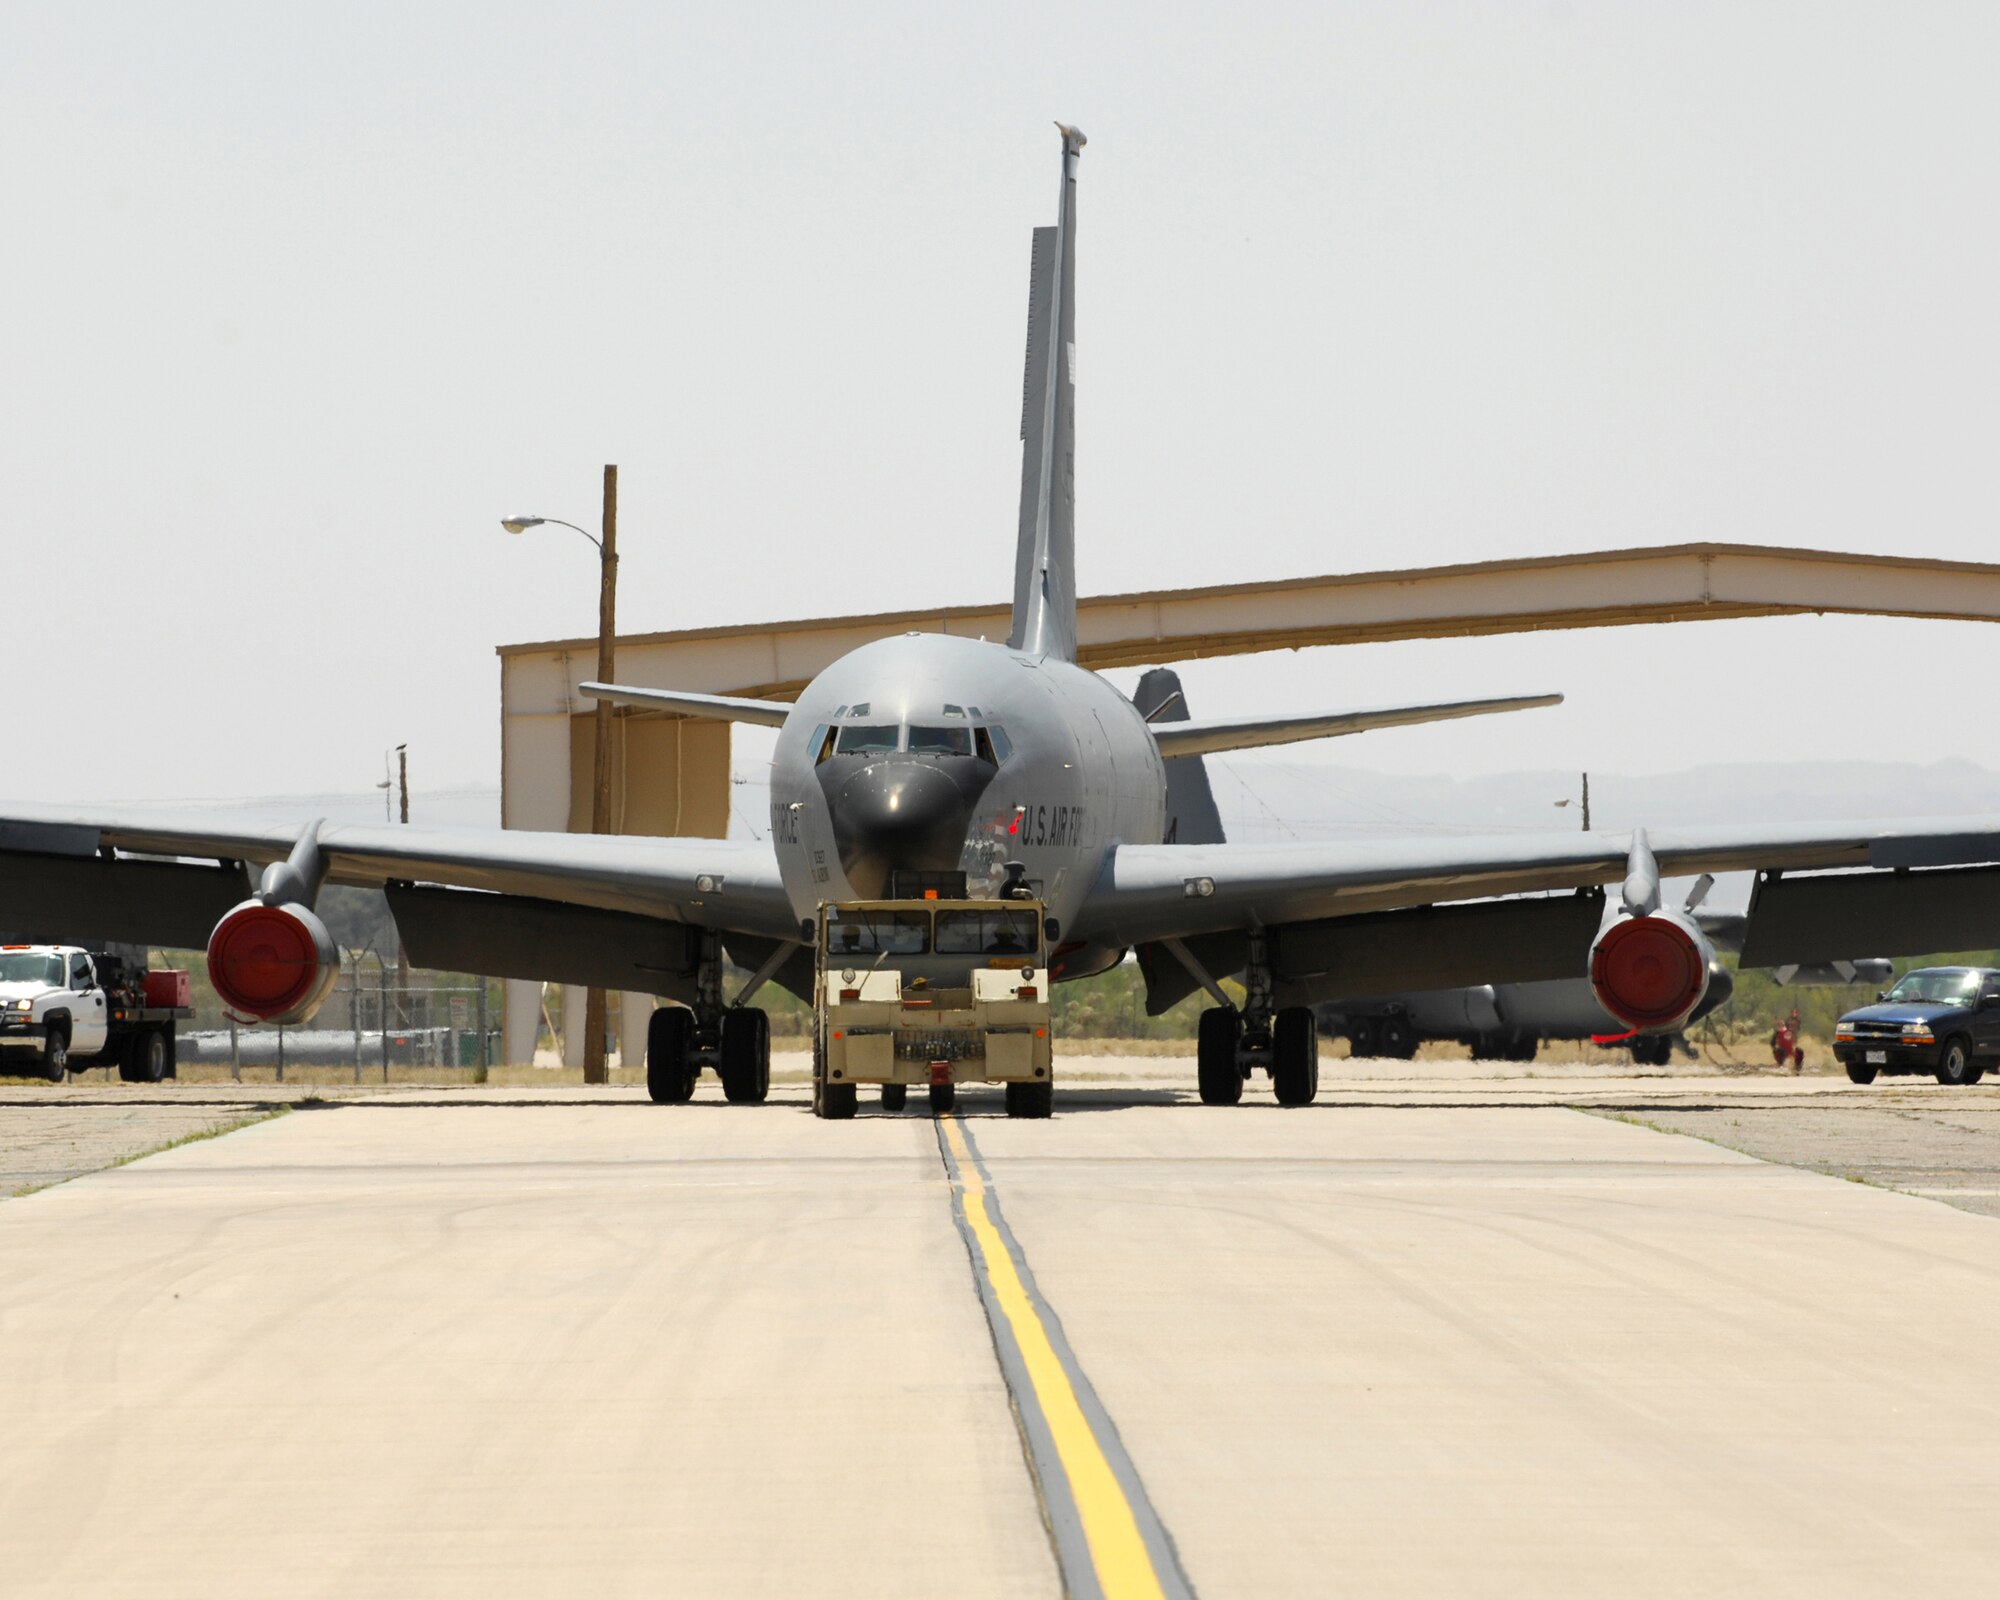 Air Force KC-135 E model aircraft, tail number 0327 is towed by personnel from the 309th Aerospace Maintenance and Regeneration Group from the active flight line at Davis-Monthan Air Force base to the storage area.  The 50 year old aircraft was delivered to the group for long term storage at the 2,600 acre facility after serving with the 151st Air Refueling Wing, Utah Air National Guard for more than 20 years.  

The 309 AMARG is a one-of-a-kind specialized facility within the Air Force Materiel Command's 309th Maintenance Wing at Hill AFB, Utah. The 309 AMARG provides critical aerospace maintenance and regeneration capabilities for Joint and Allied/Coalition warfighters in support of global operations and agile combat support for a wide range of military operations.

U.S. Air Force photo by:  Master Sgt. Burke Baker